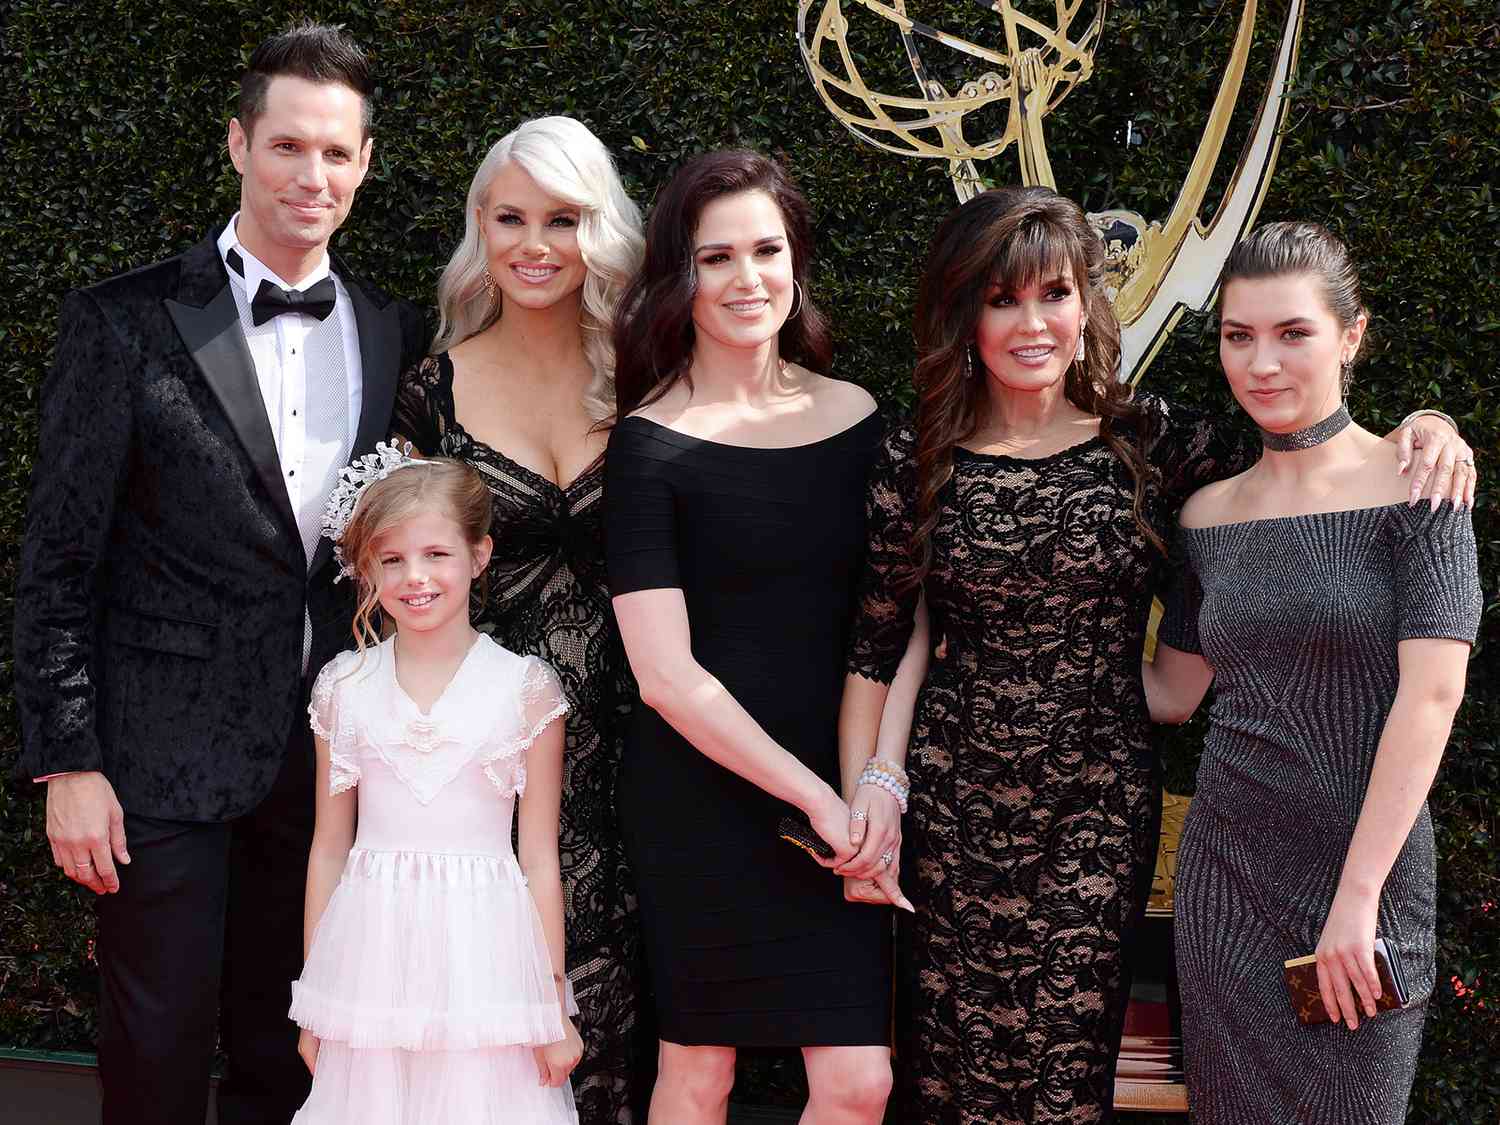 Marie Osmond and her family at the 45th Annual Daytime Emmy Awards